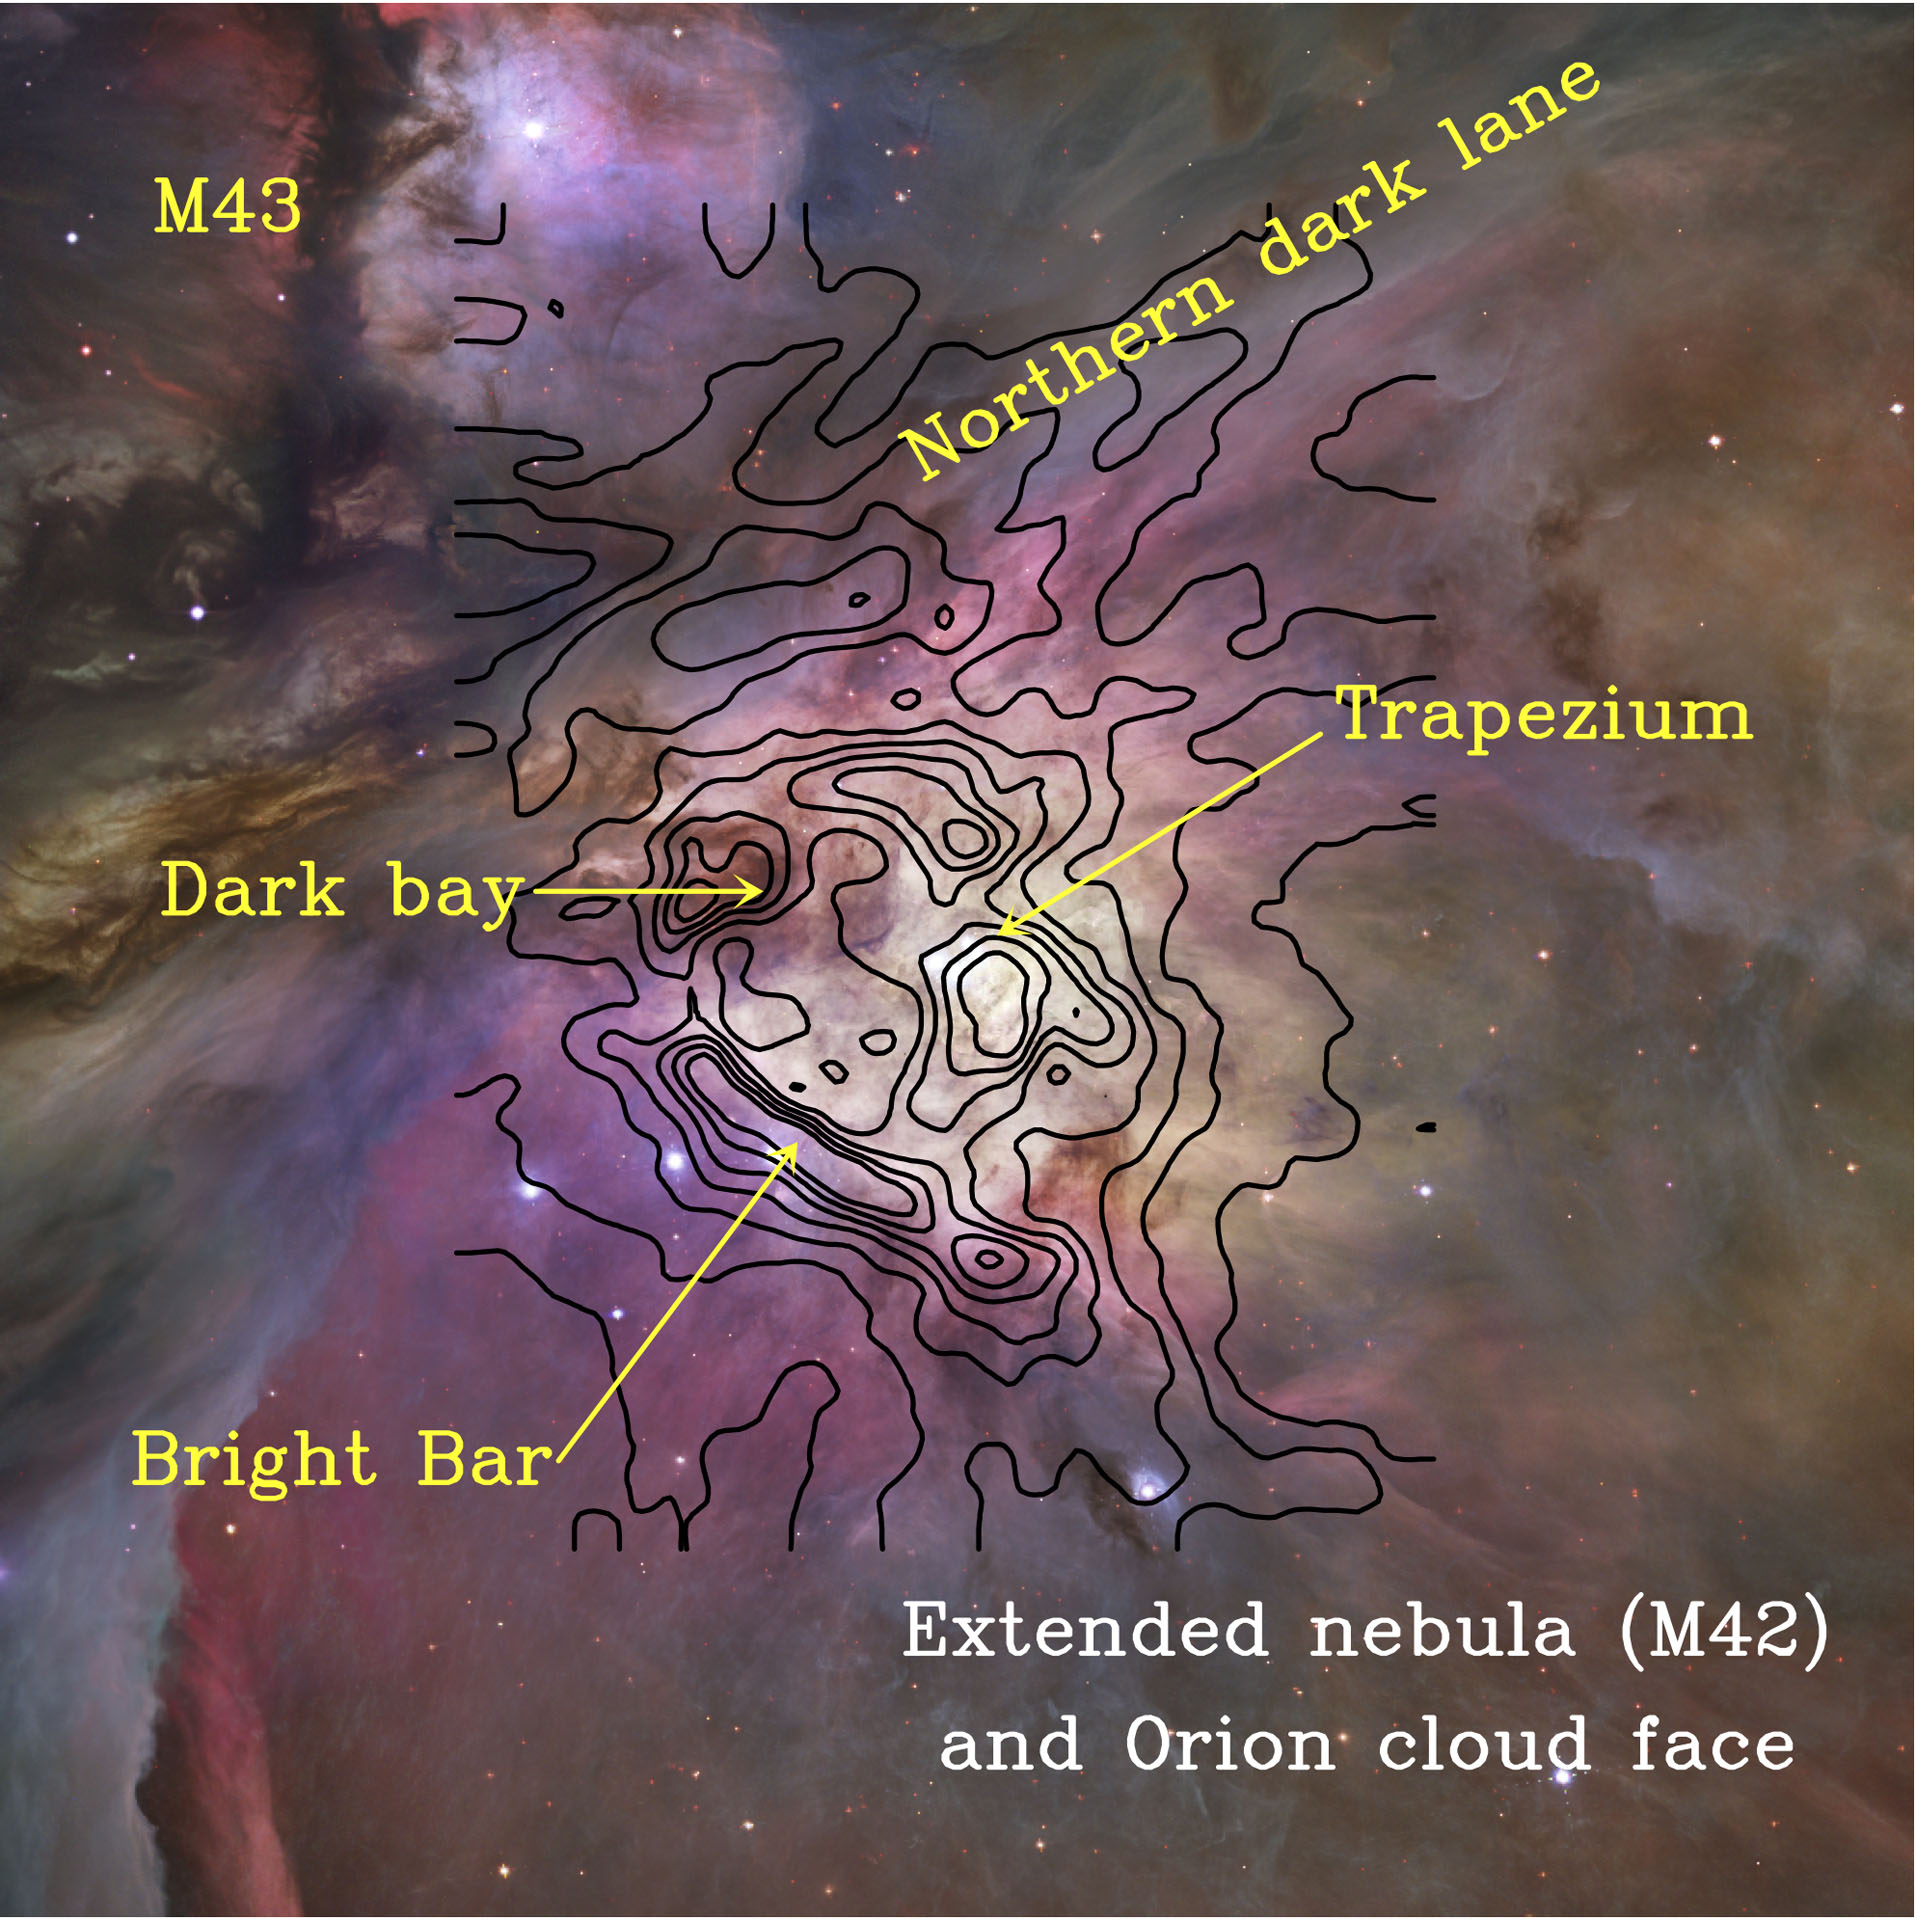 Colour-composite image of the Orion Nebula (M42) taken in the visible-light with the Hubble Space Telescope (Robberto et al. 2013). The Orion molecular cloud, where new protostars are developing, lies behind the ionized nebula. Black contours show the far infrared C+ emission detected with Herschel/HIFI tracing the skin of the cloud (Goicoechea et al. 2015)